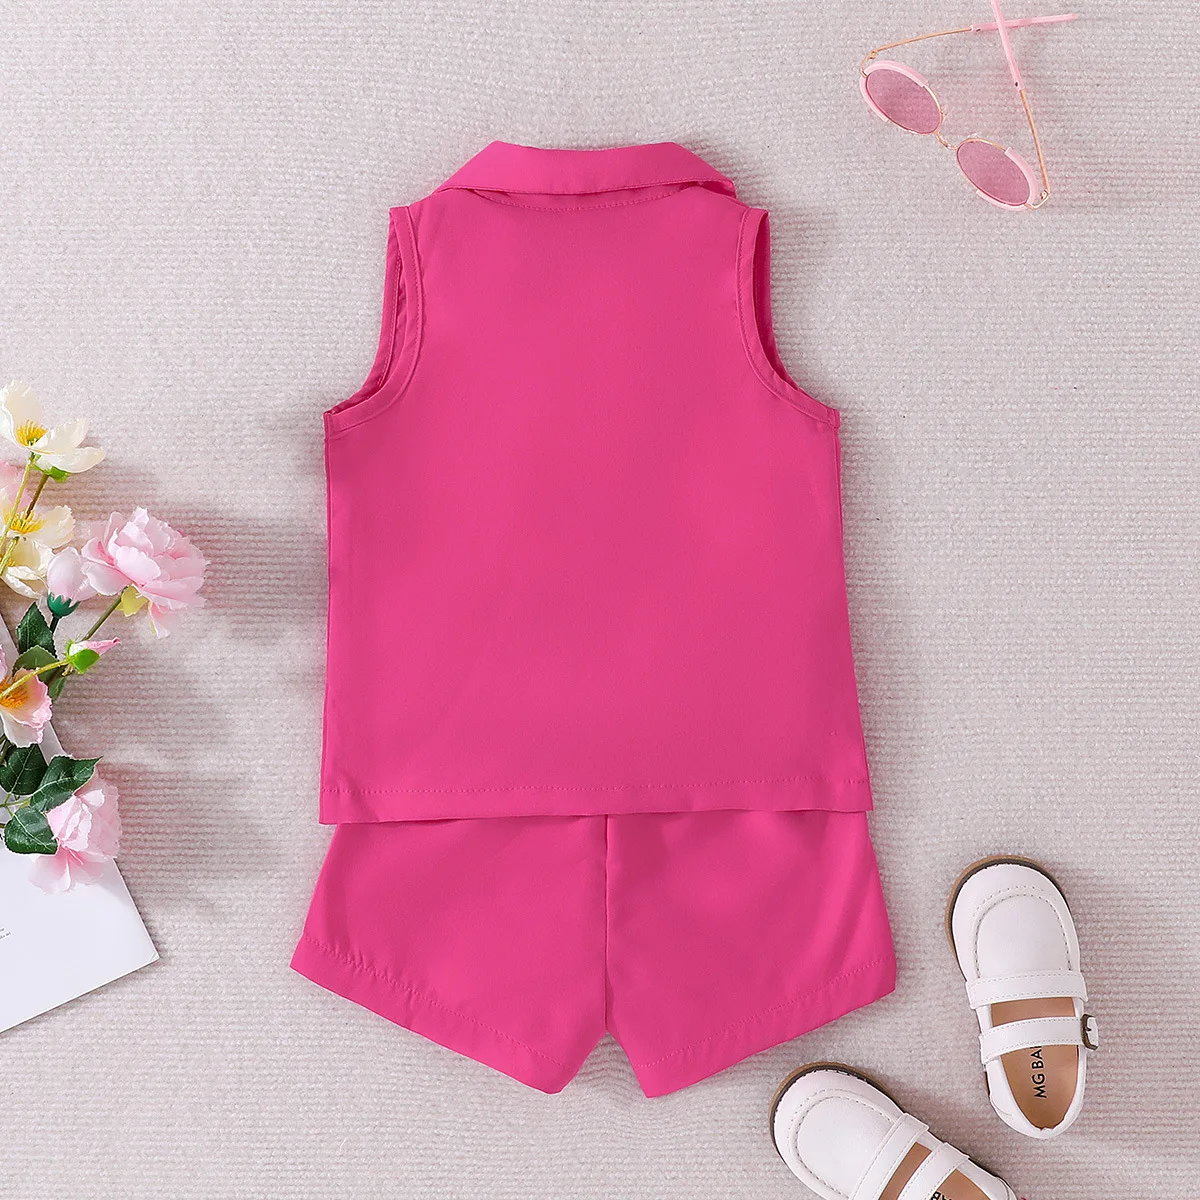 New arrival toddler girl clothes boutique kids sleeveless coat+vest+shorts clothing candy-color girl's 3pcs outfits